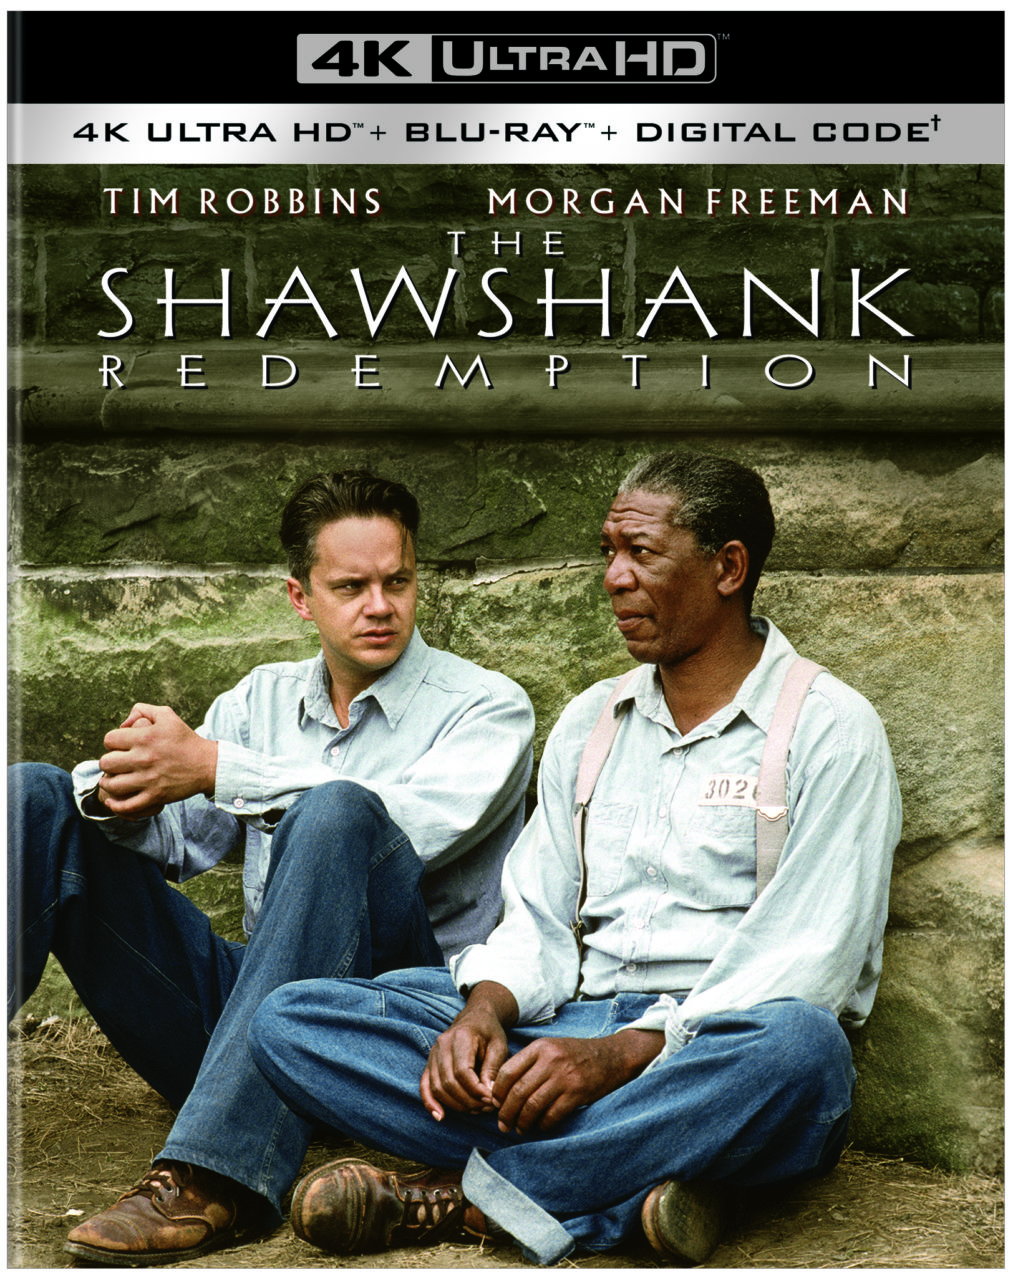 The Shawshank Redemption 4K Ultra HD Combo Pack cover (Warner Bros. Home Entertainment)